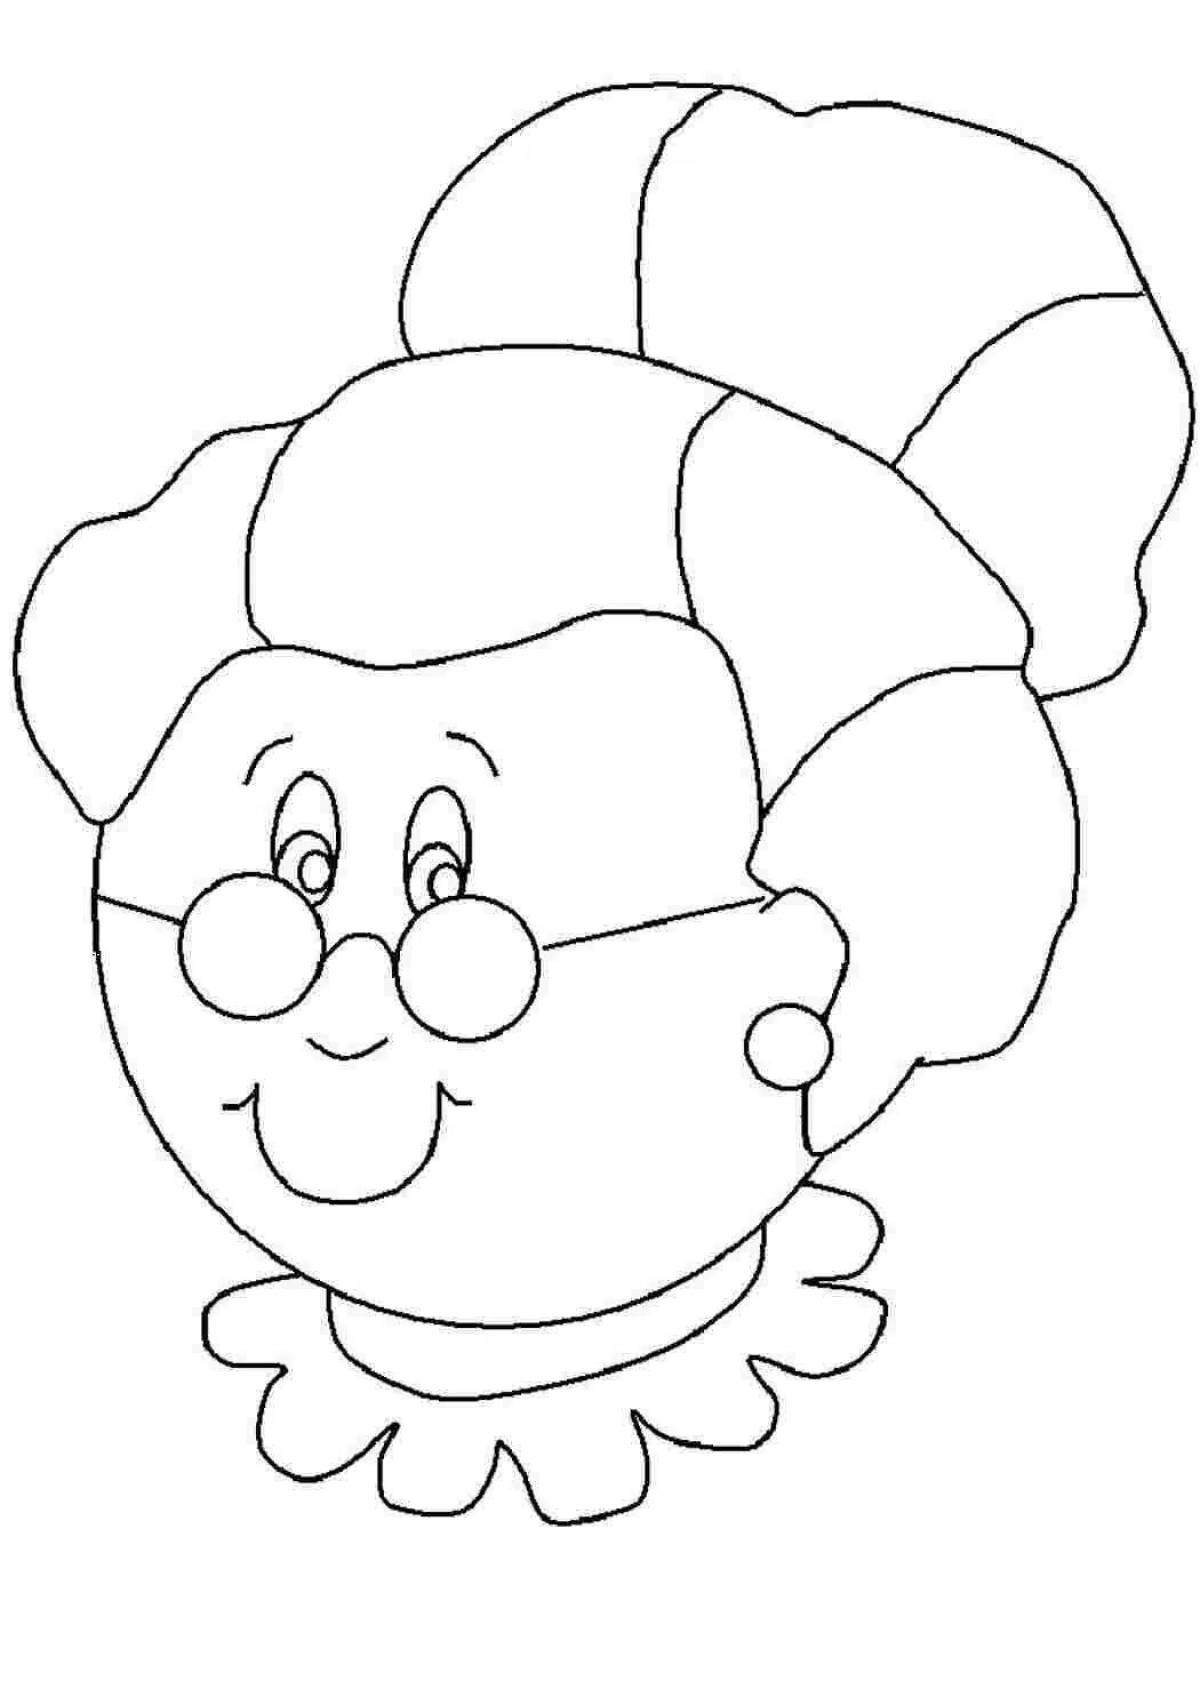 Old lady jubilant coloring book